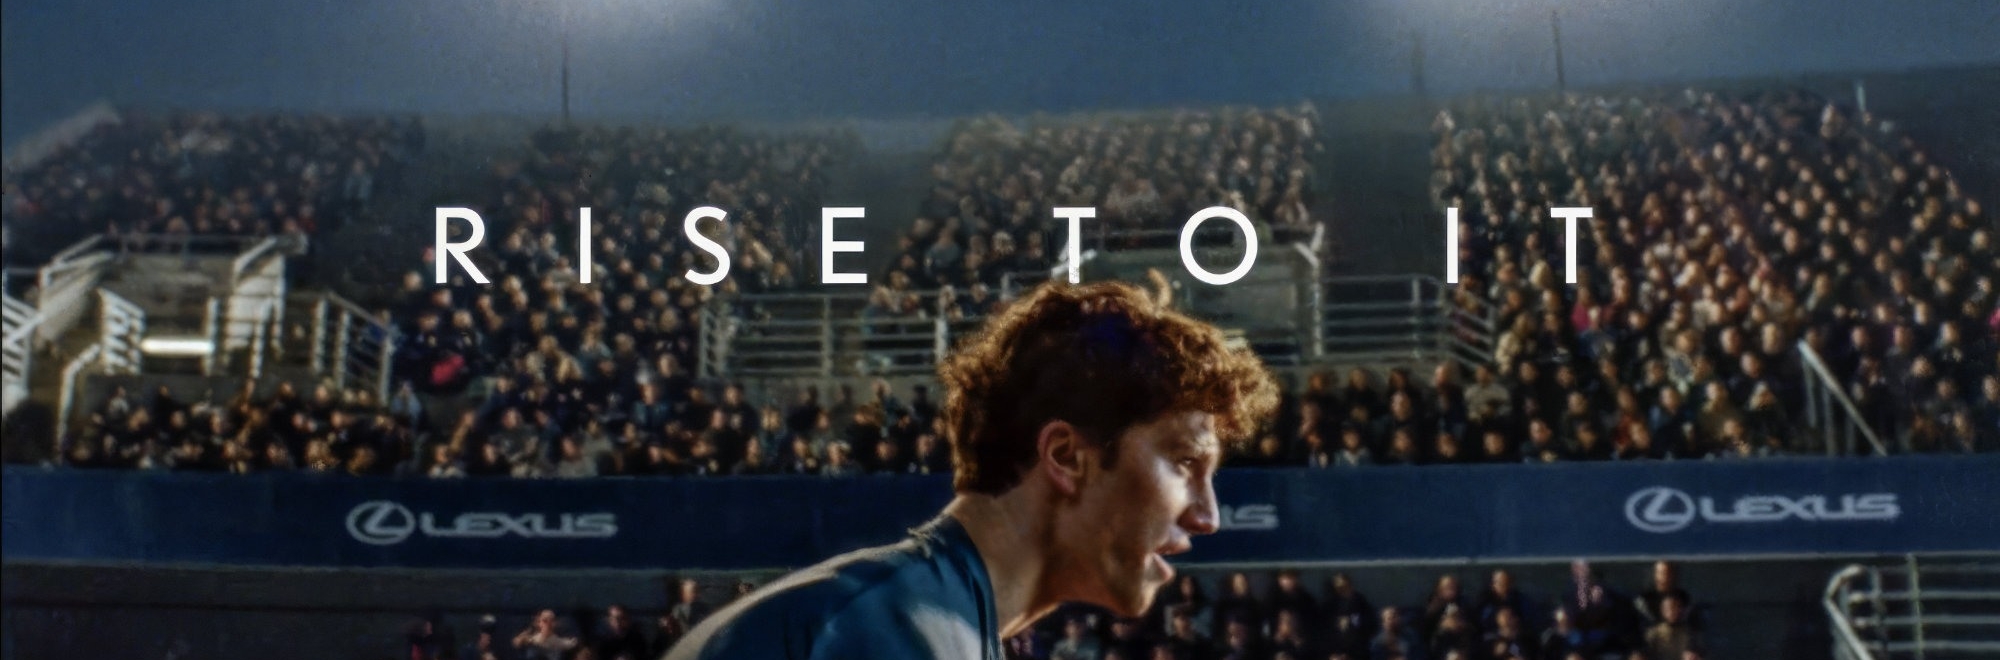 A love letter to tennis: Lexus and T&Pm ‘Rise To It’ in nostalgic campaign